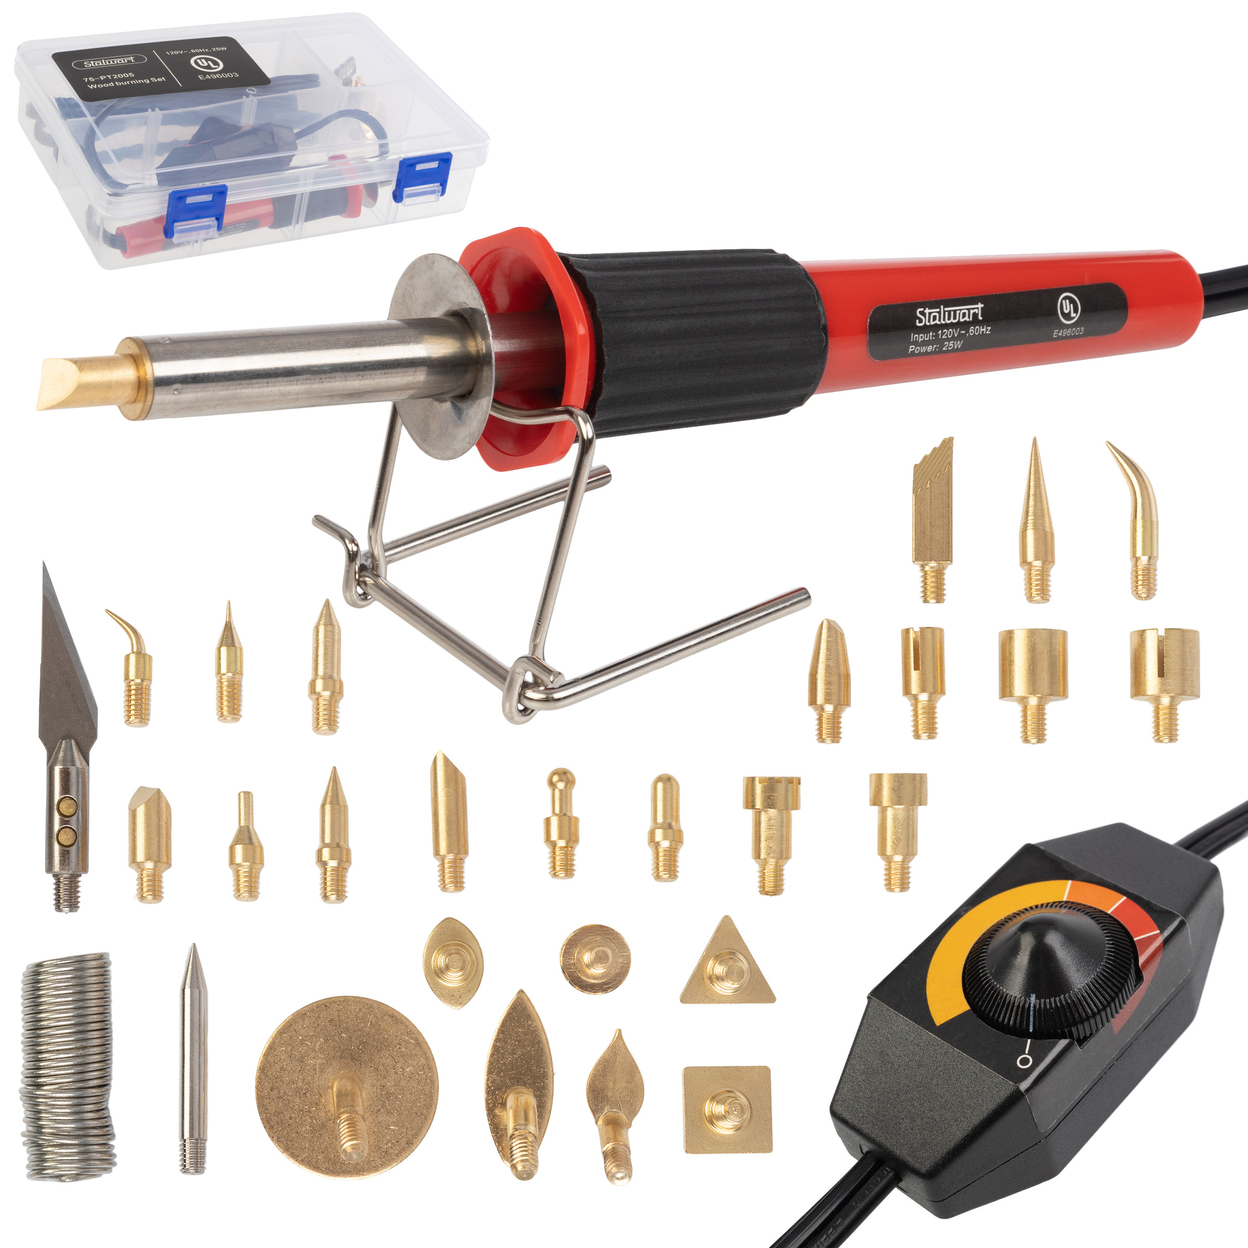 29Piece Wood Burning Kit With Tips, Stamps, Case, 25W Tool DIY For Adults